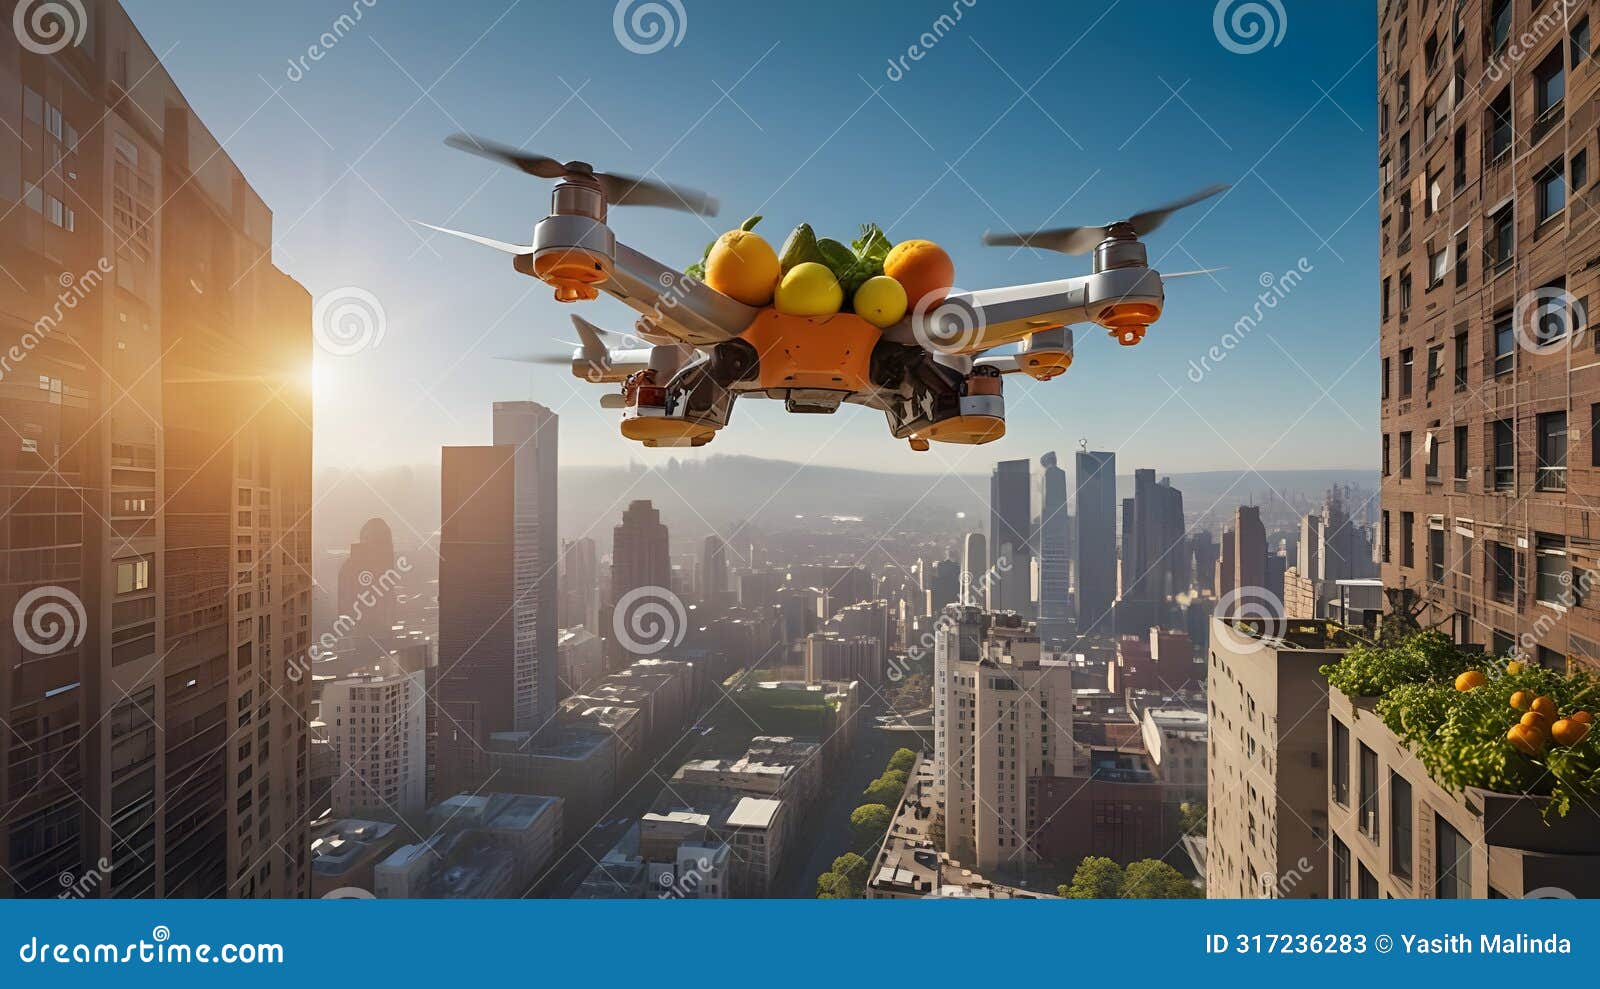 a modern drone with four rotors hovering above a vibrant cityscape